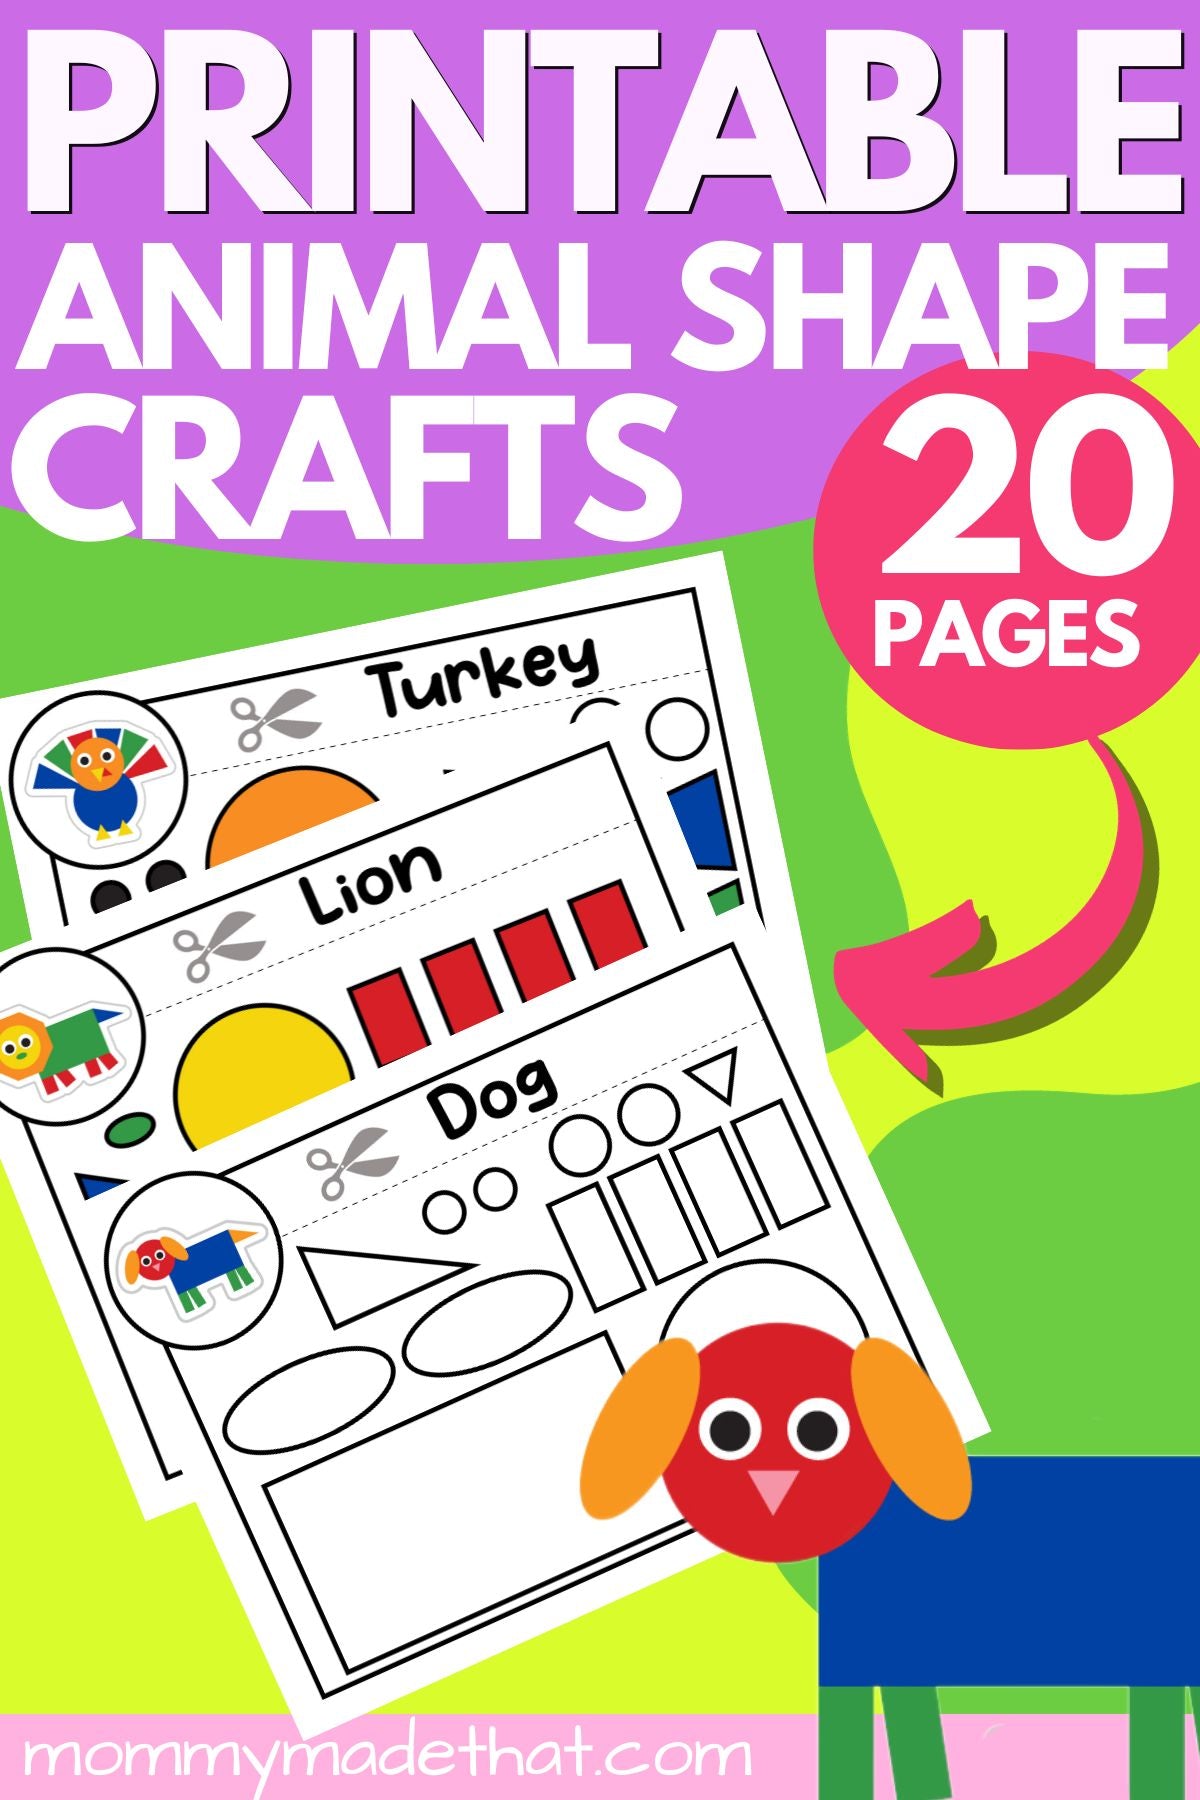 Paper Shapes Animal Crafts